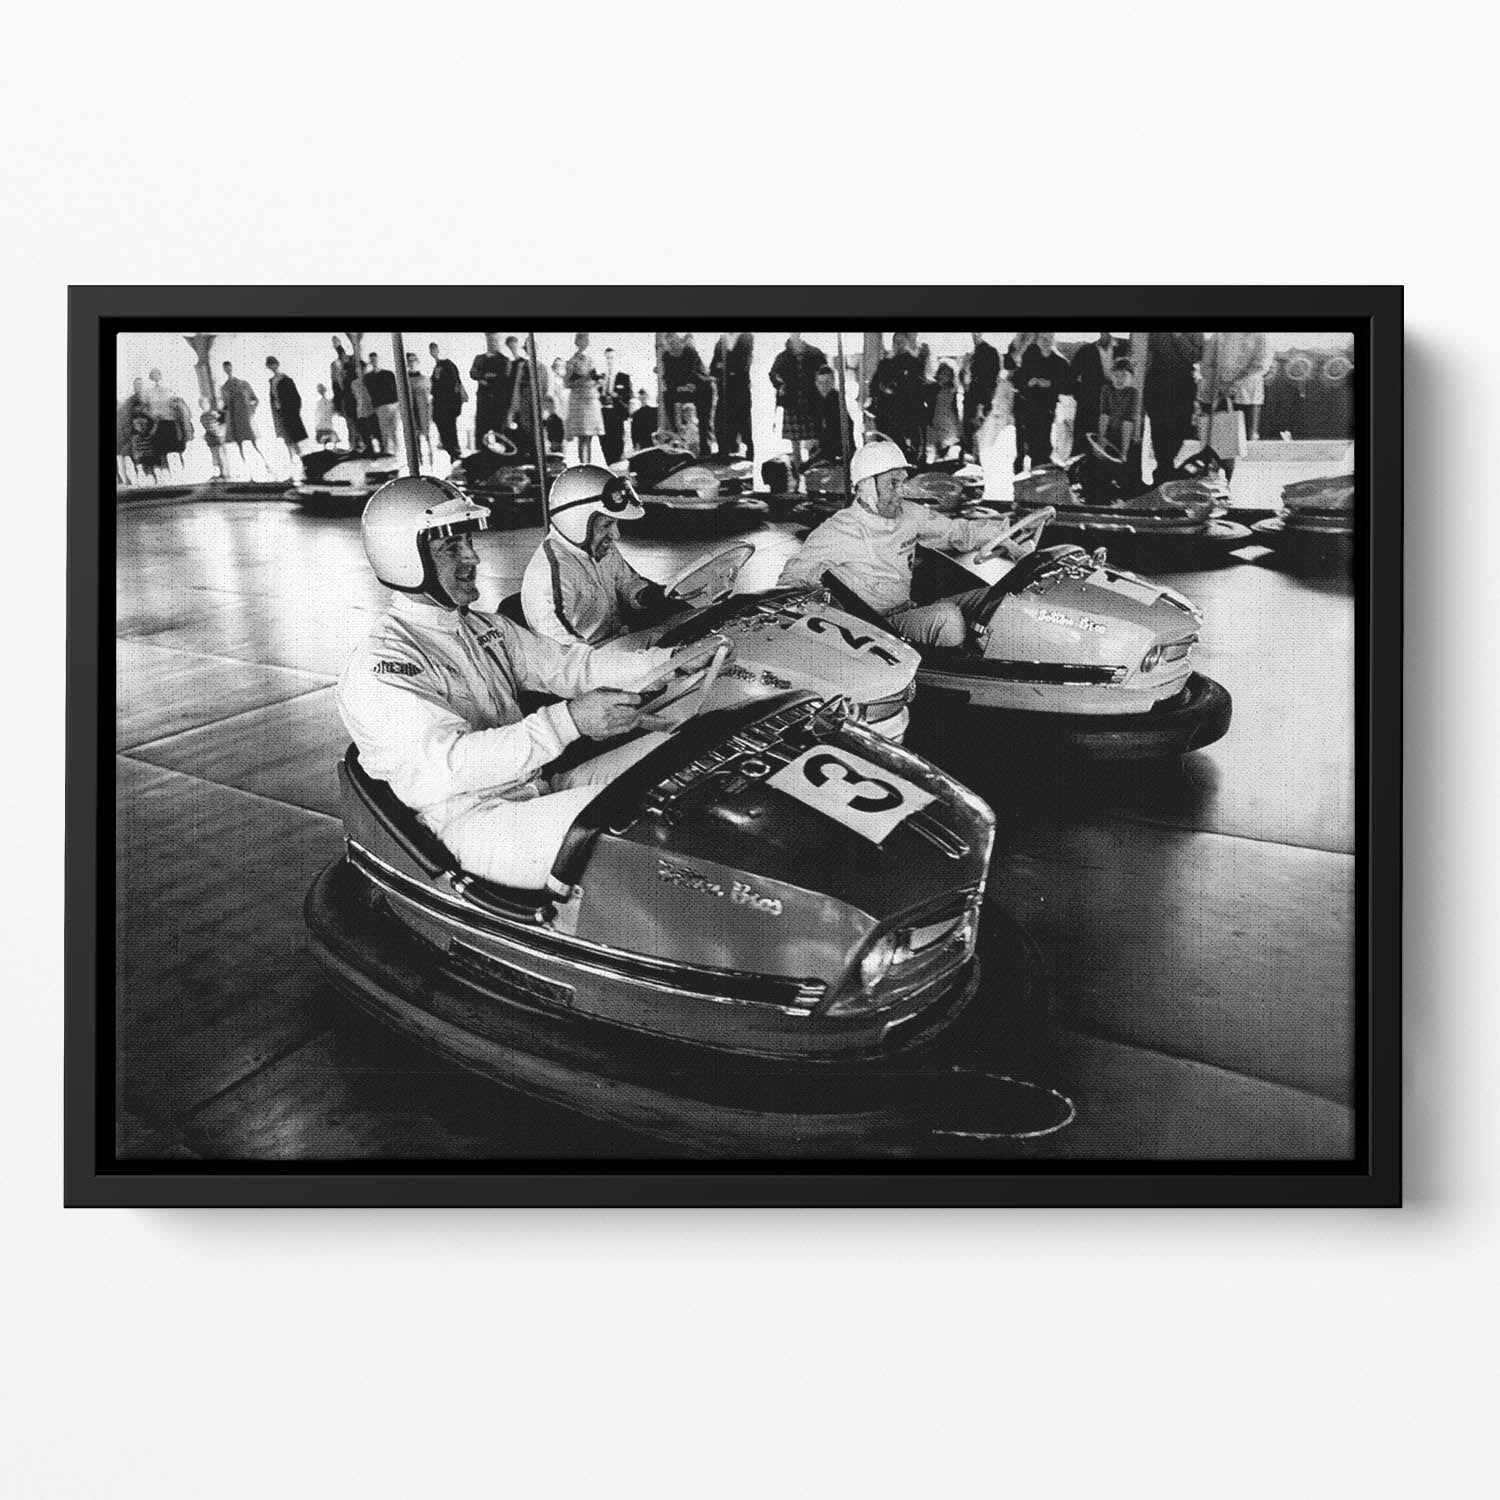 Racing drivers on the dodgems Floating Framed Canvas